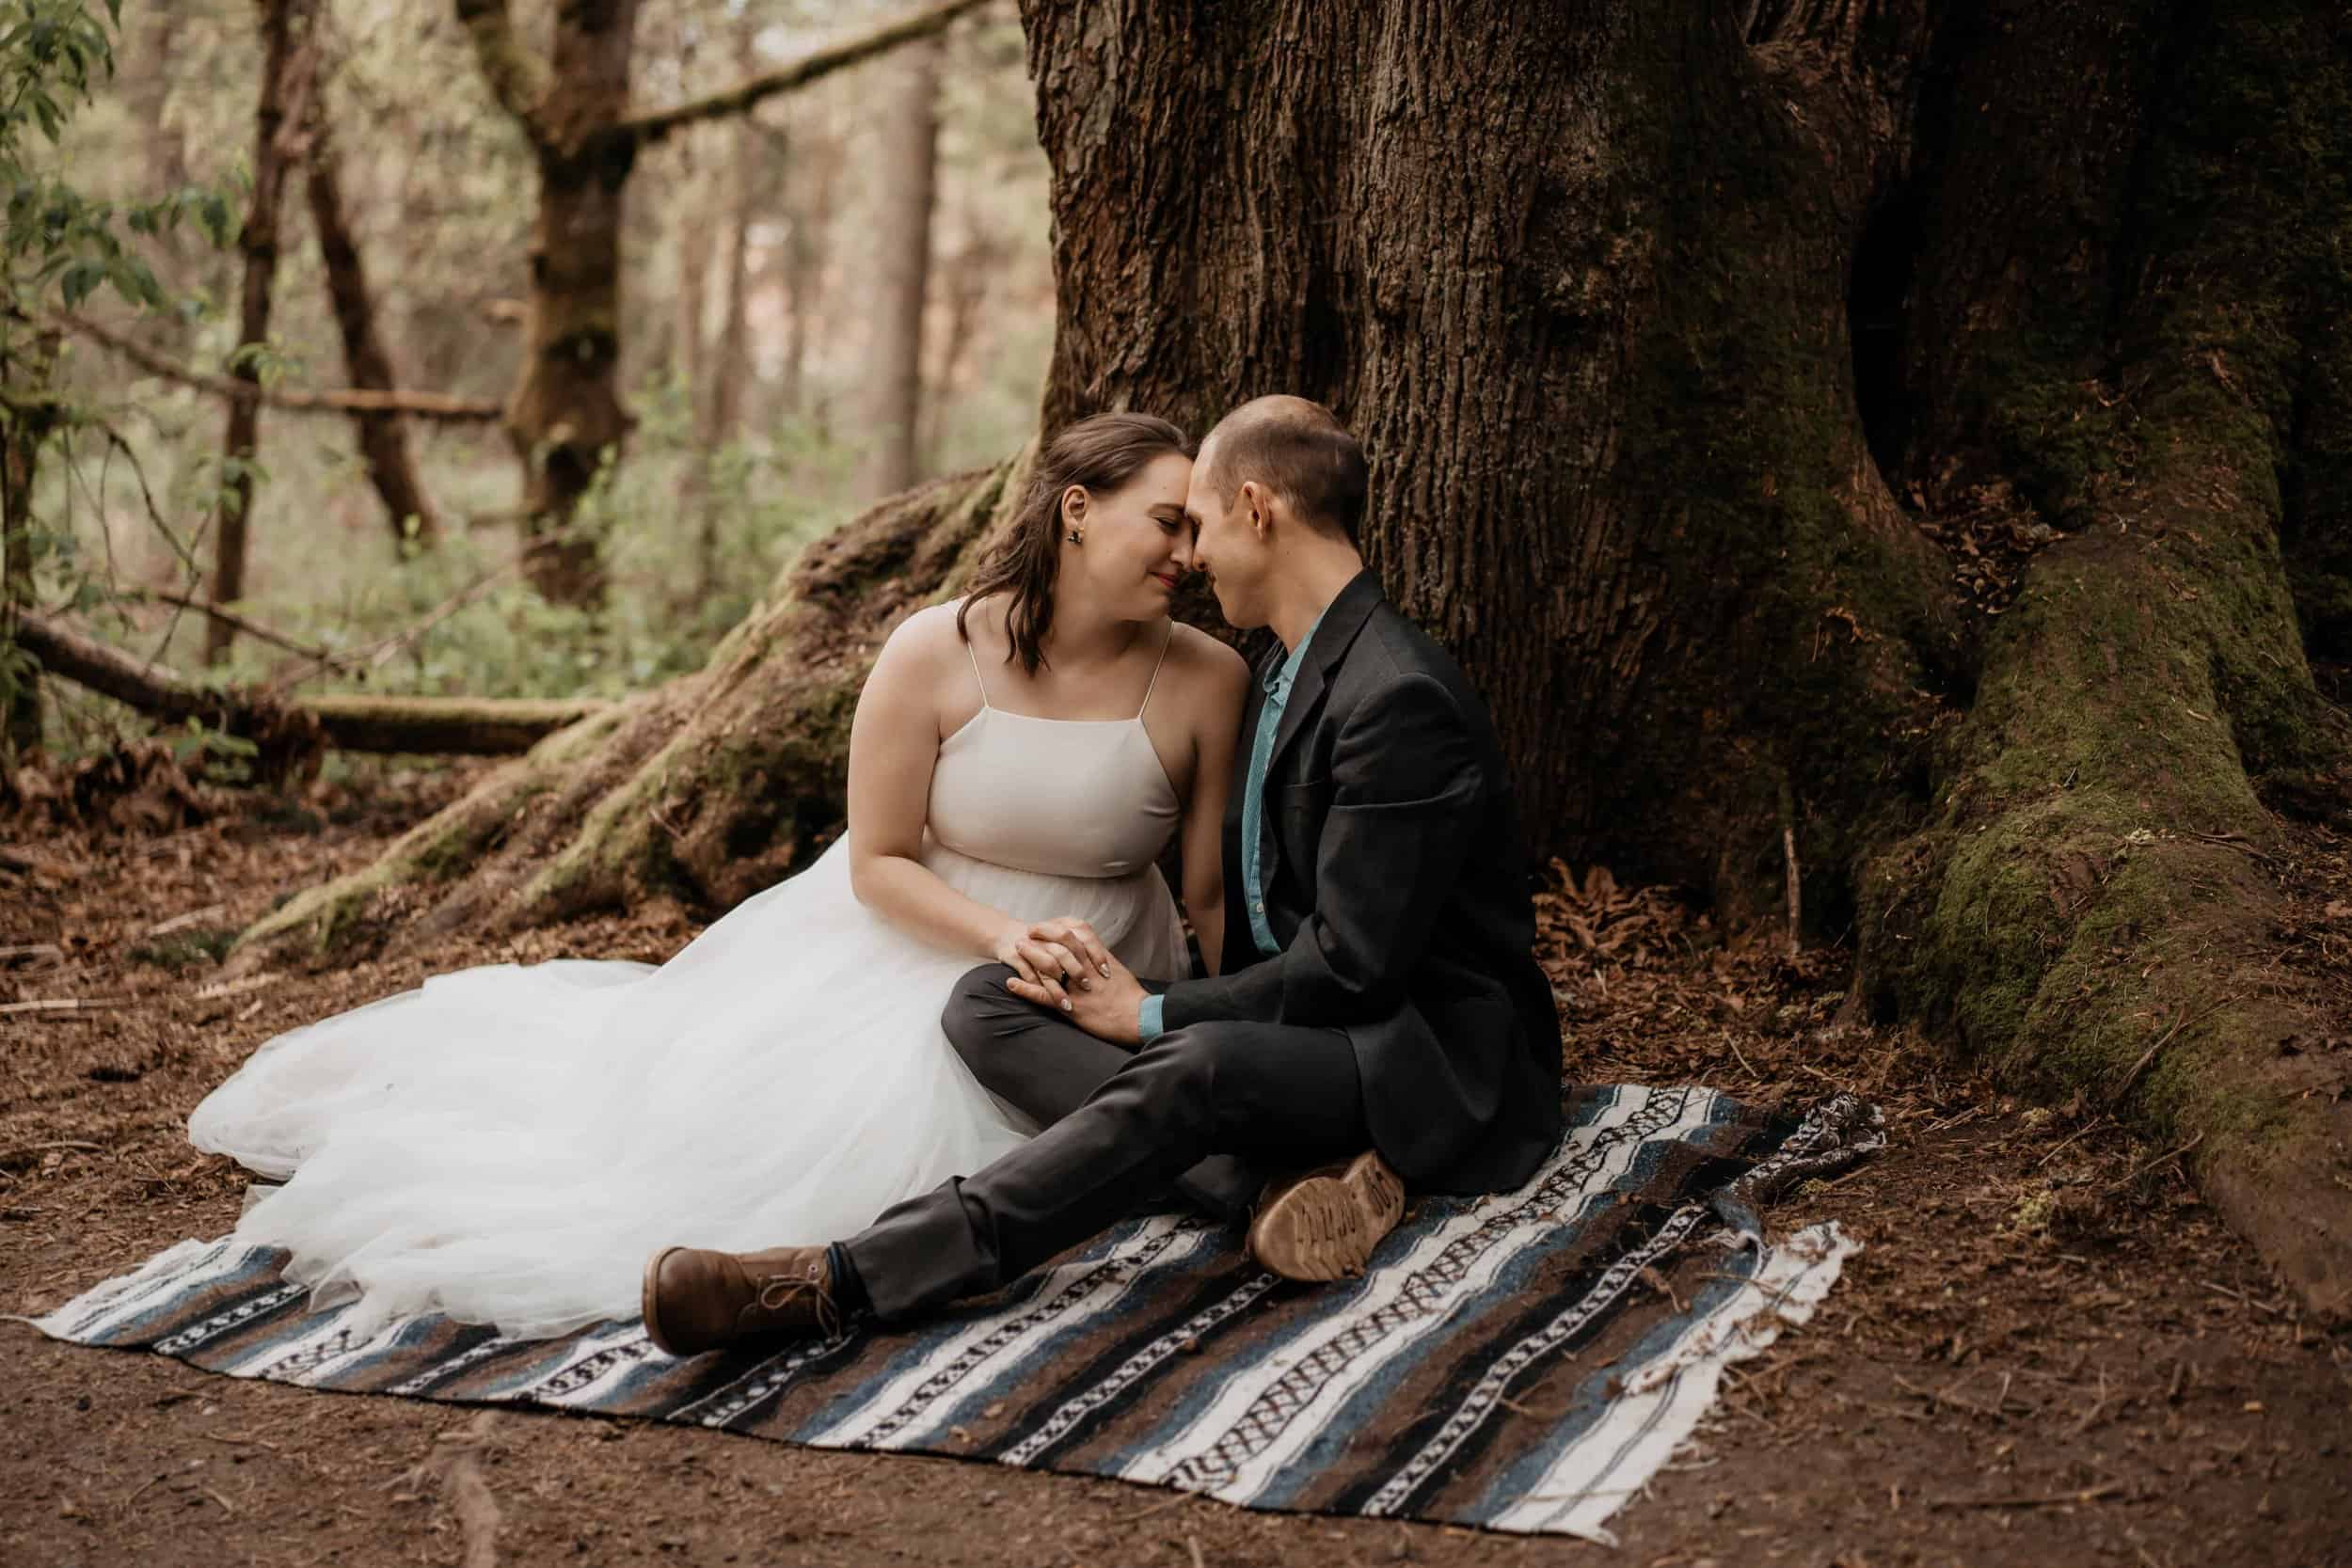 Choosing the right decor for a forest wedding